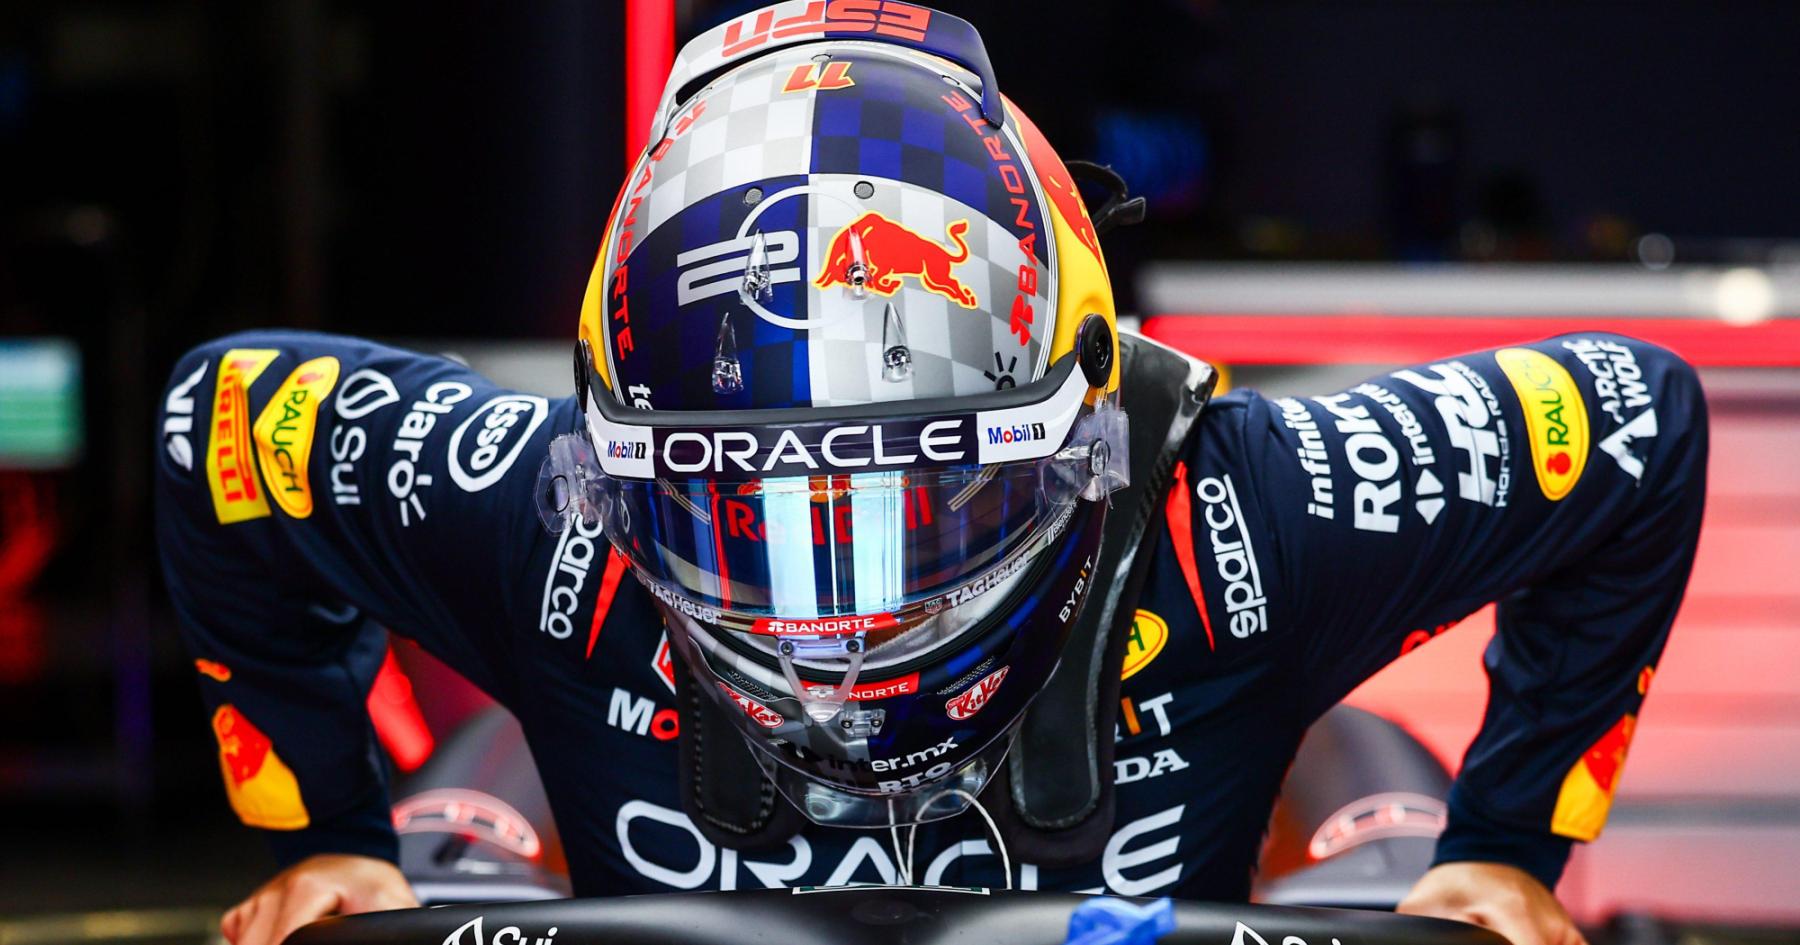 Perez's Struggling Performance Poses Growing Concerns for Red Bull